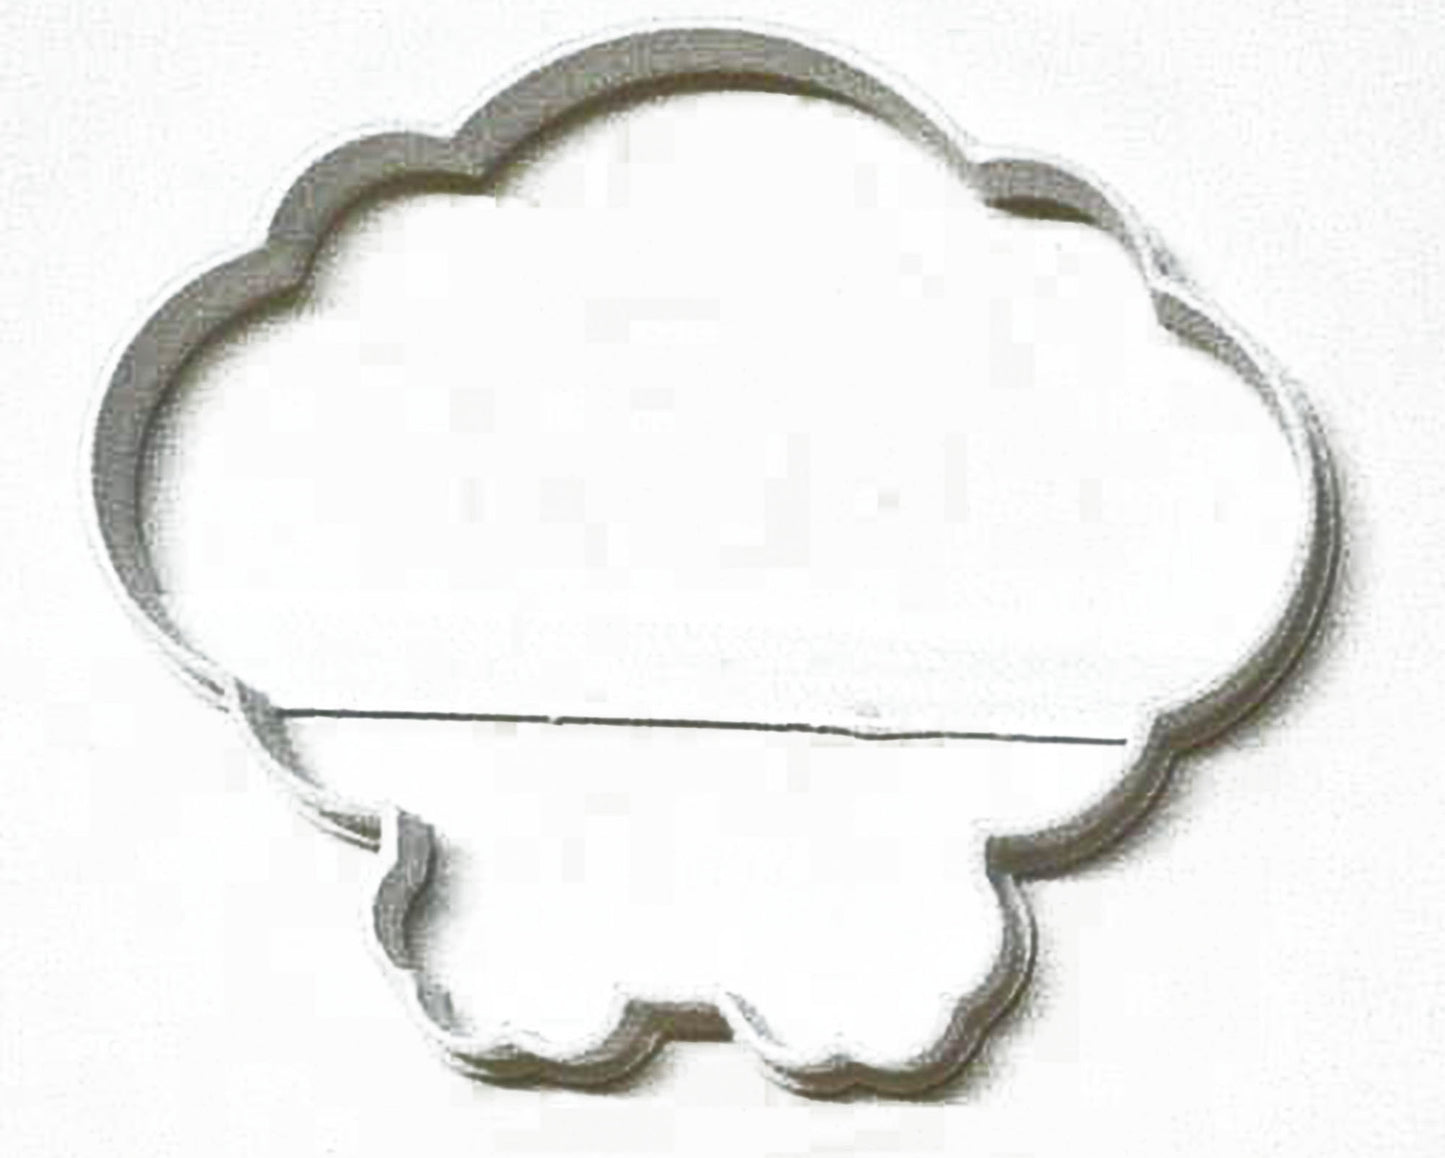 Bunny Booty Rabbit Butt Outline Easter Fun Farm Animal Cookie Cutter USA PR3151